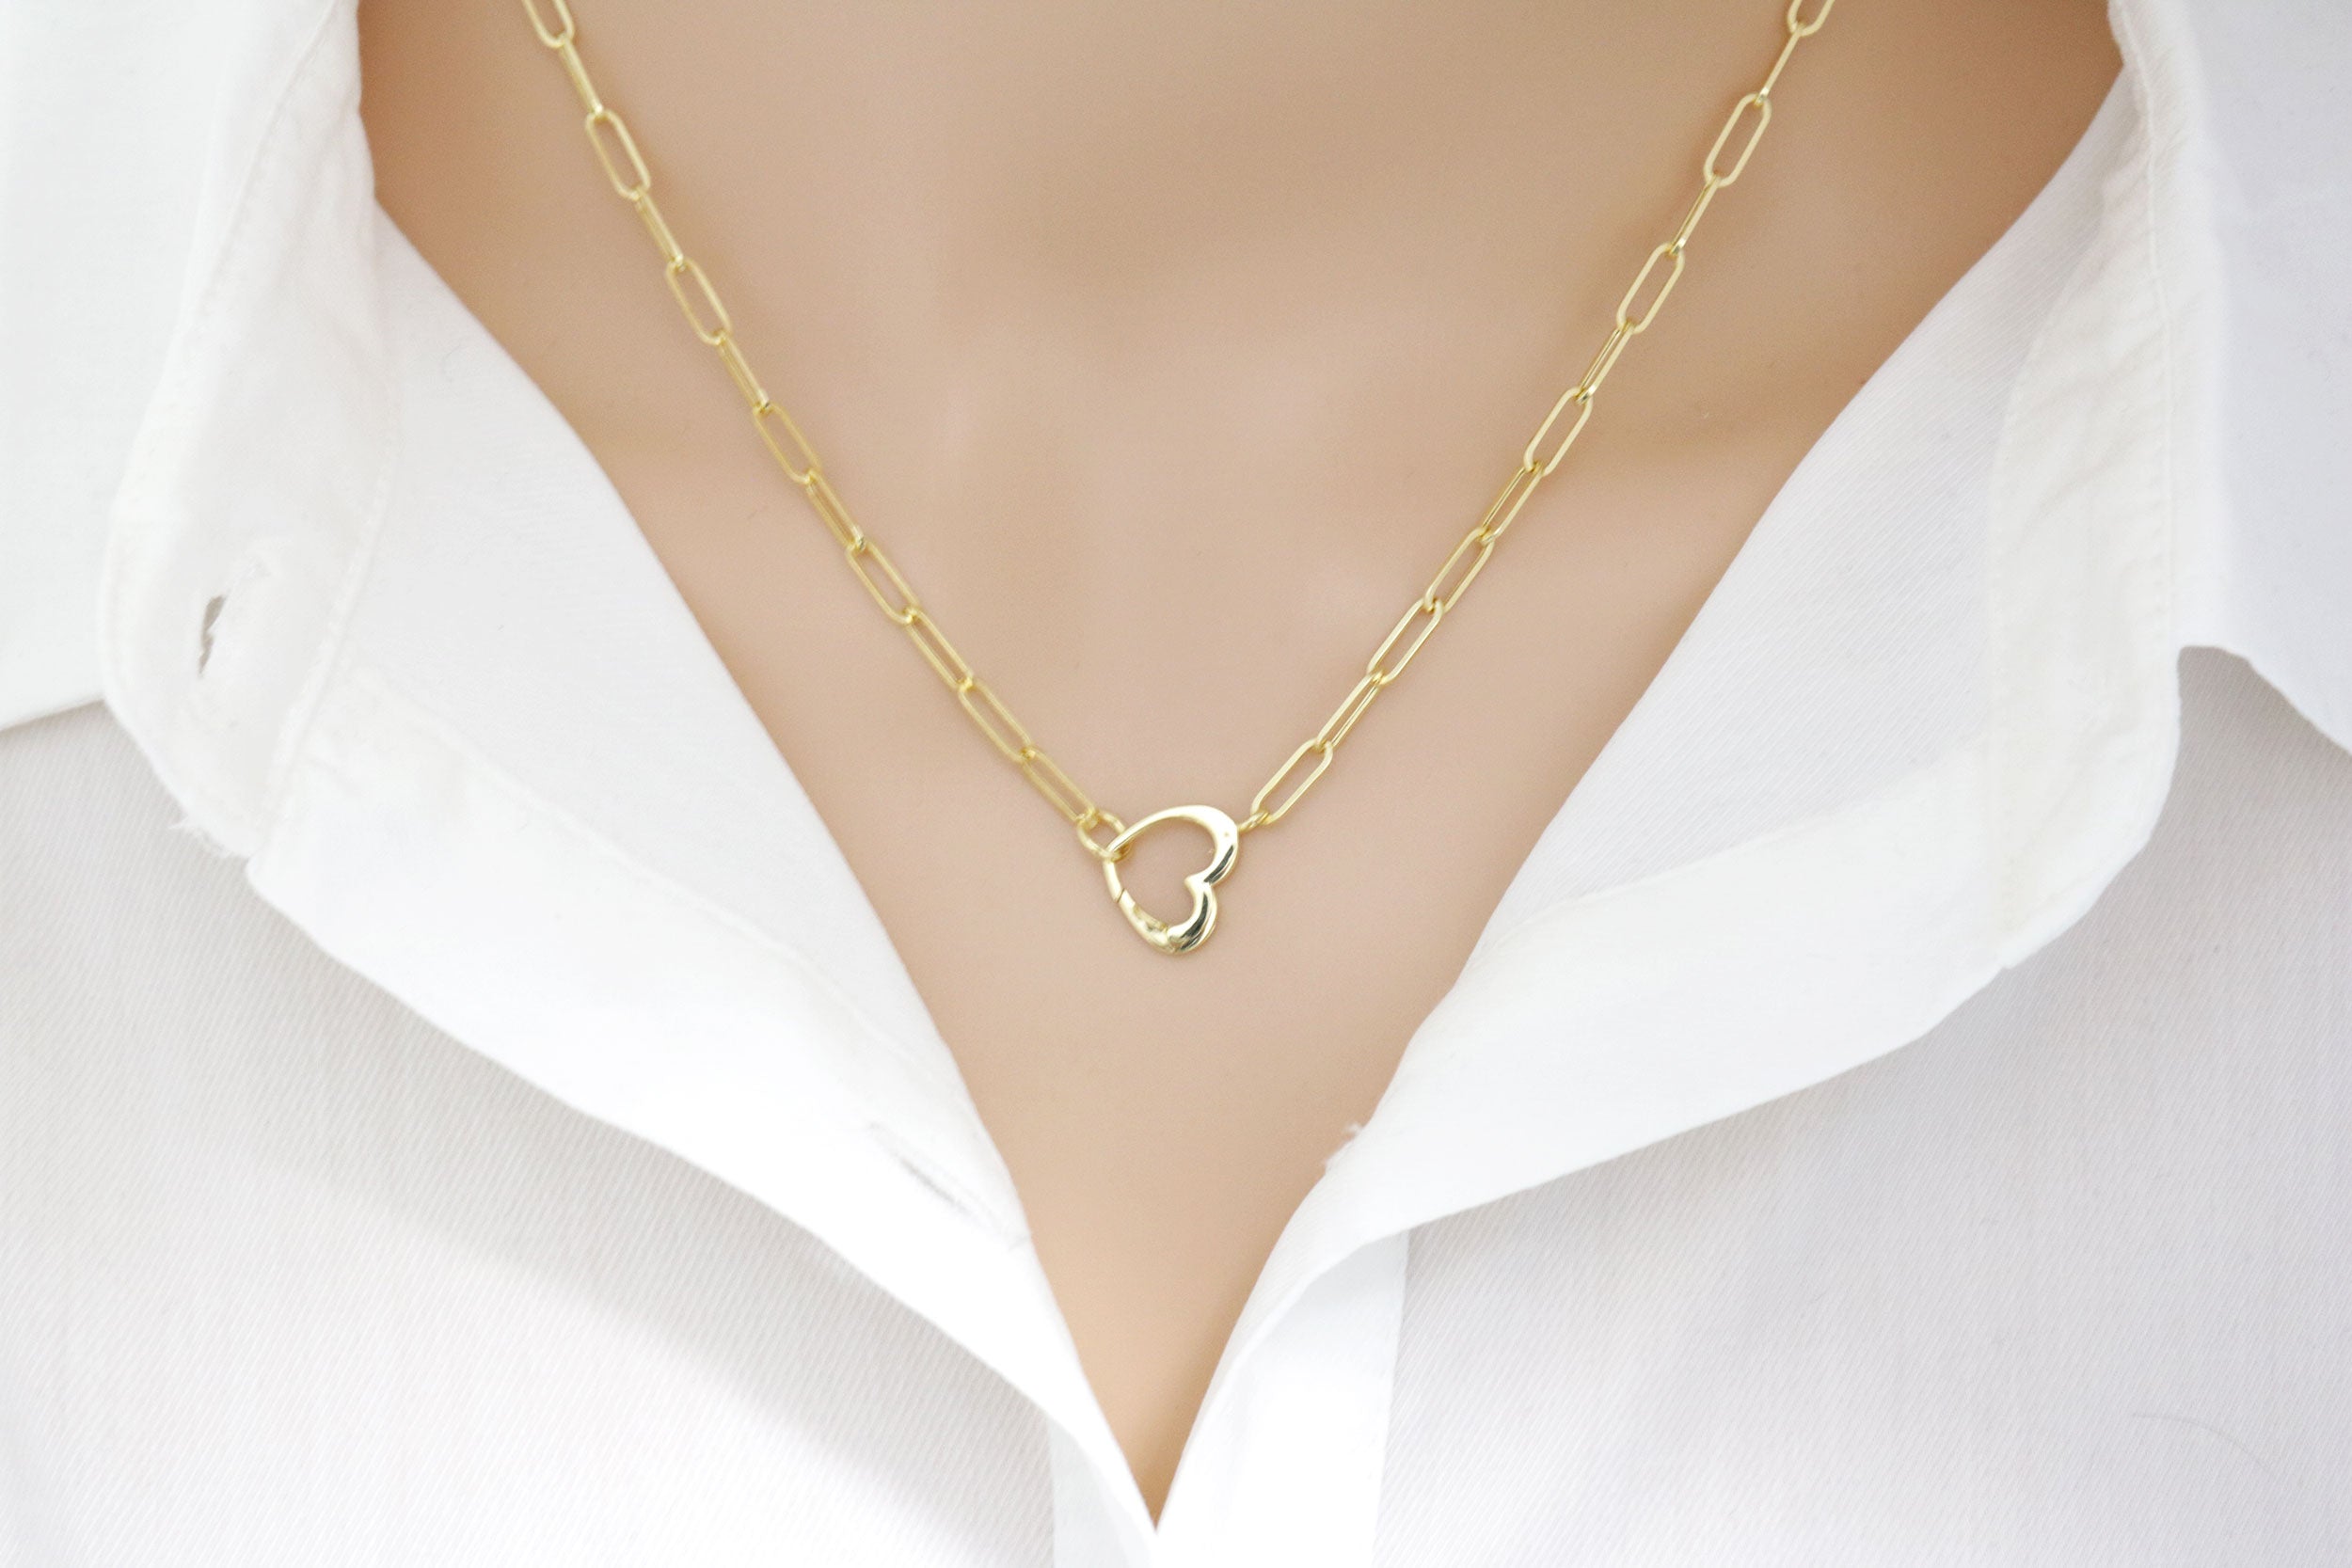 14kt Yellow Gold Carabiner Paper Clip Link Necklace. 18